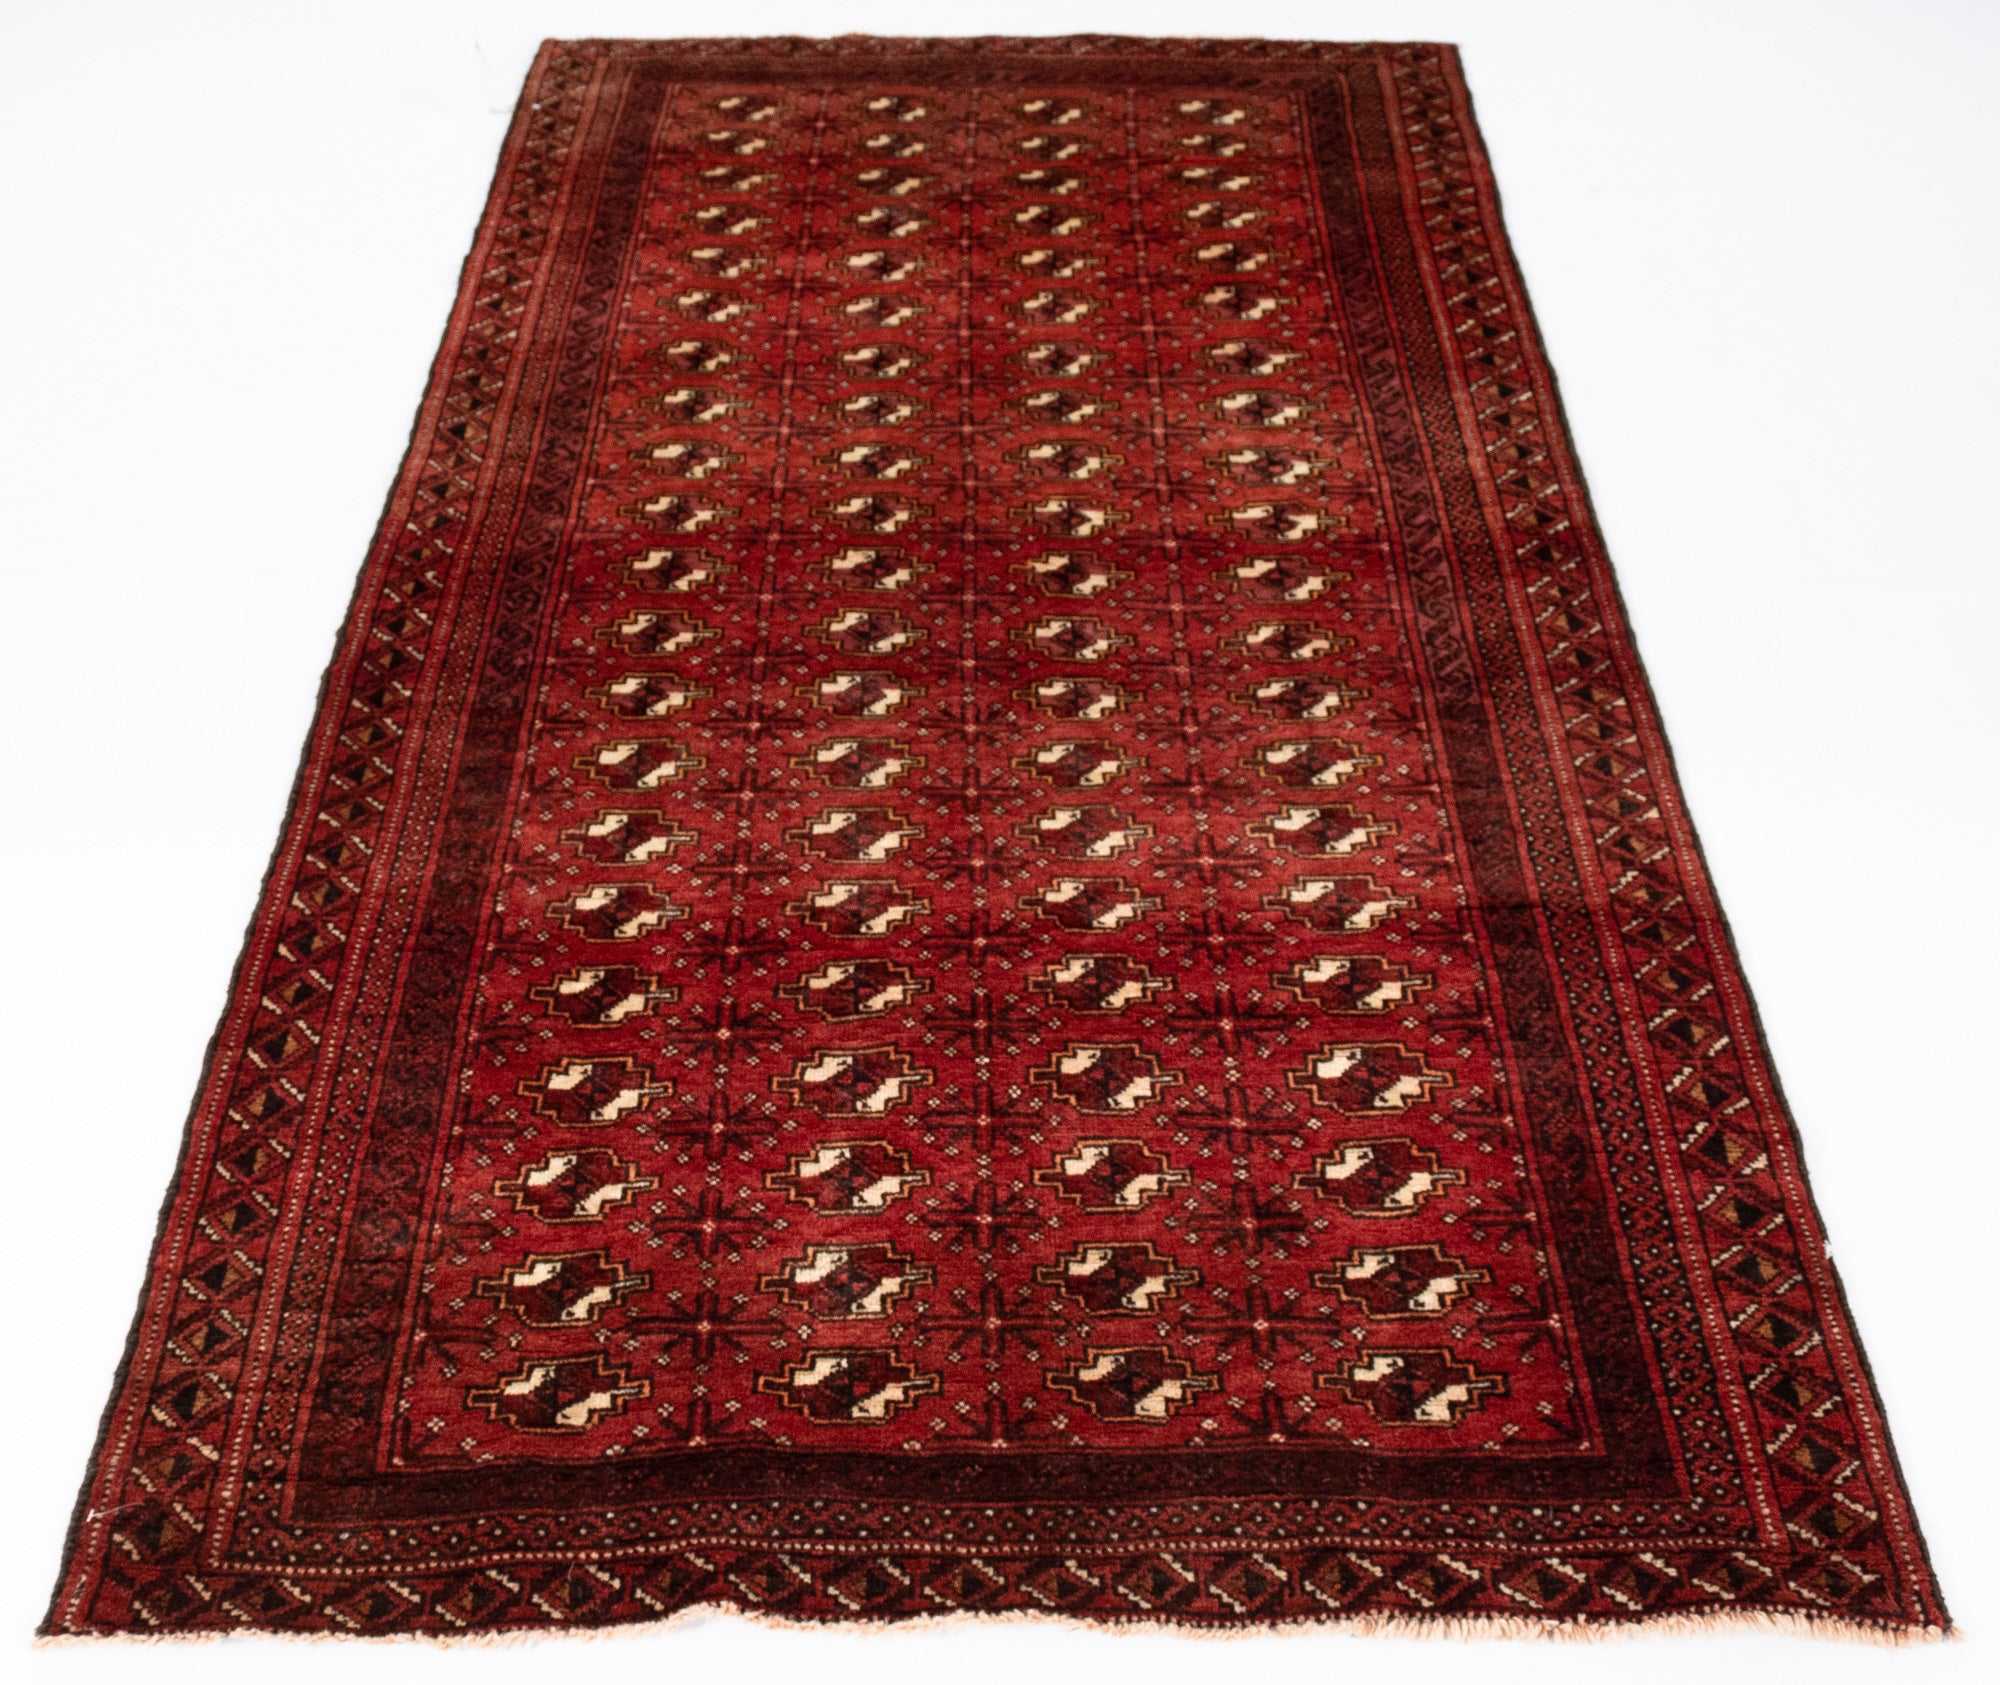 New Persian Balouch Rug <br> 3' 10 x 7' 5